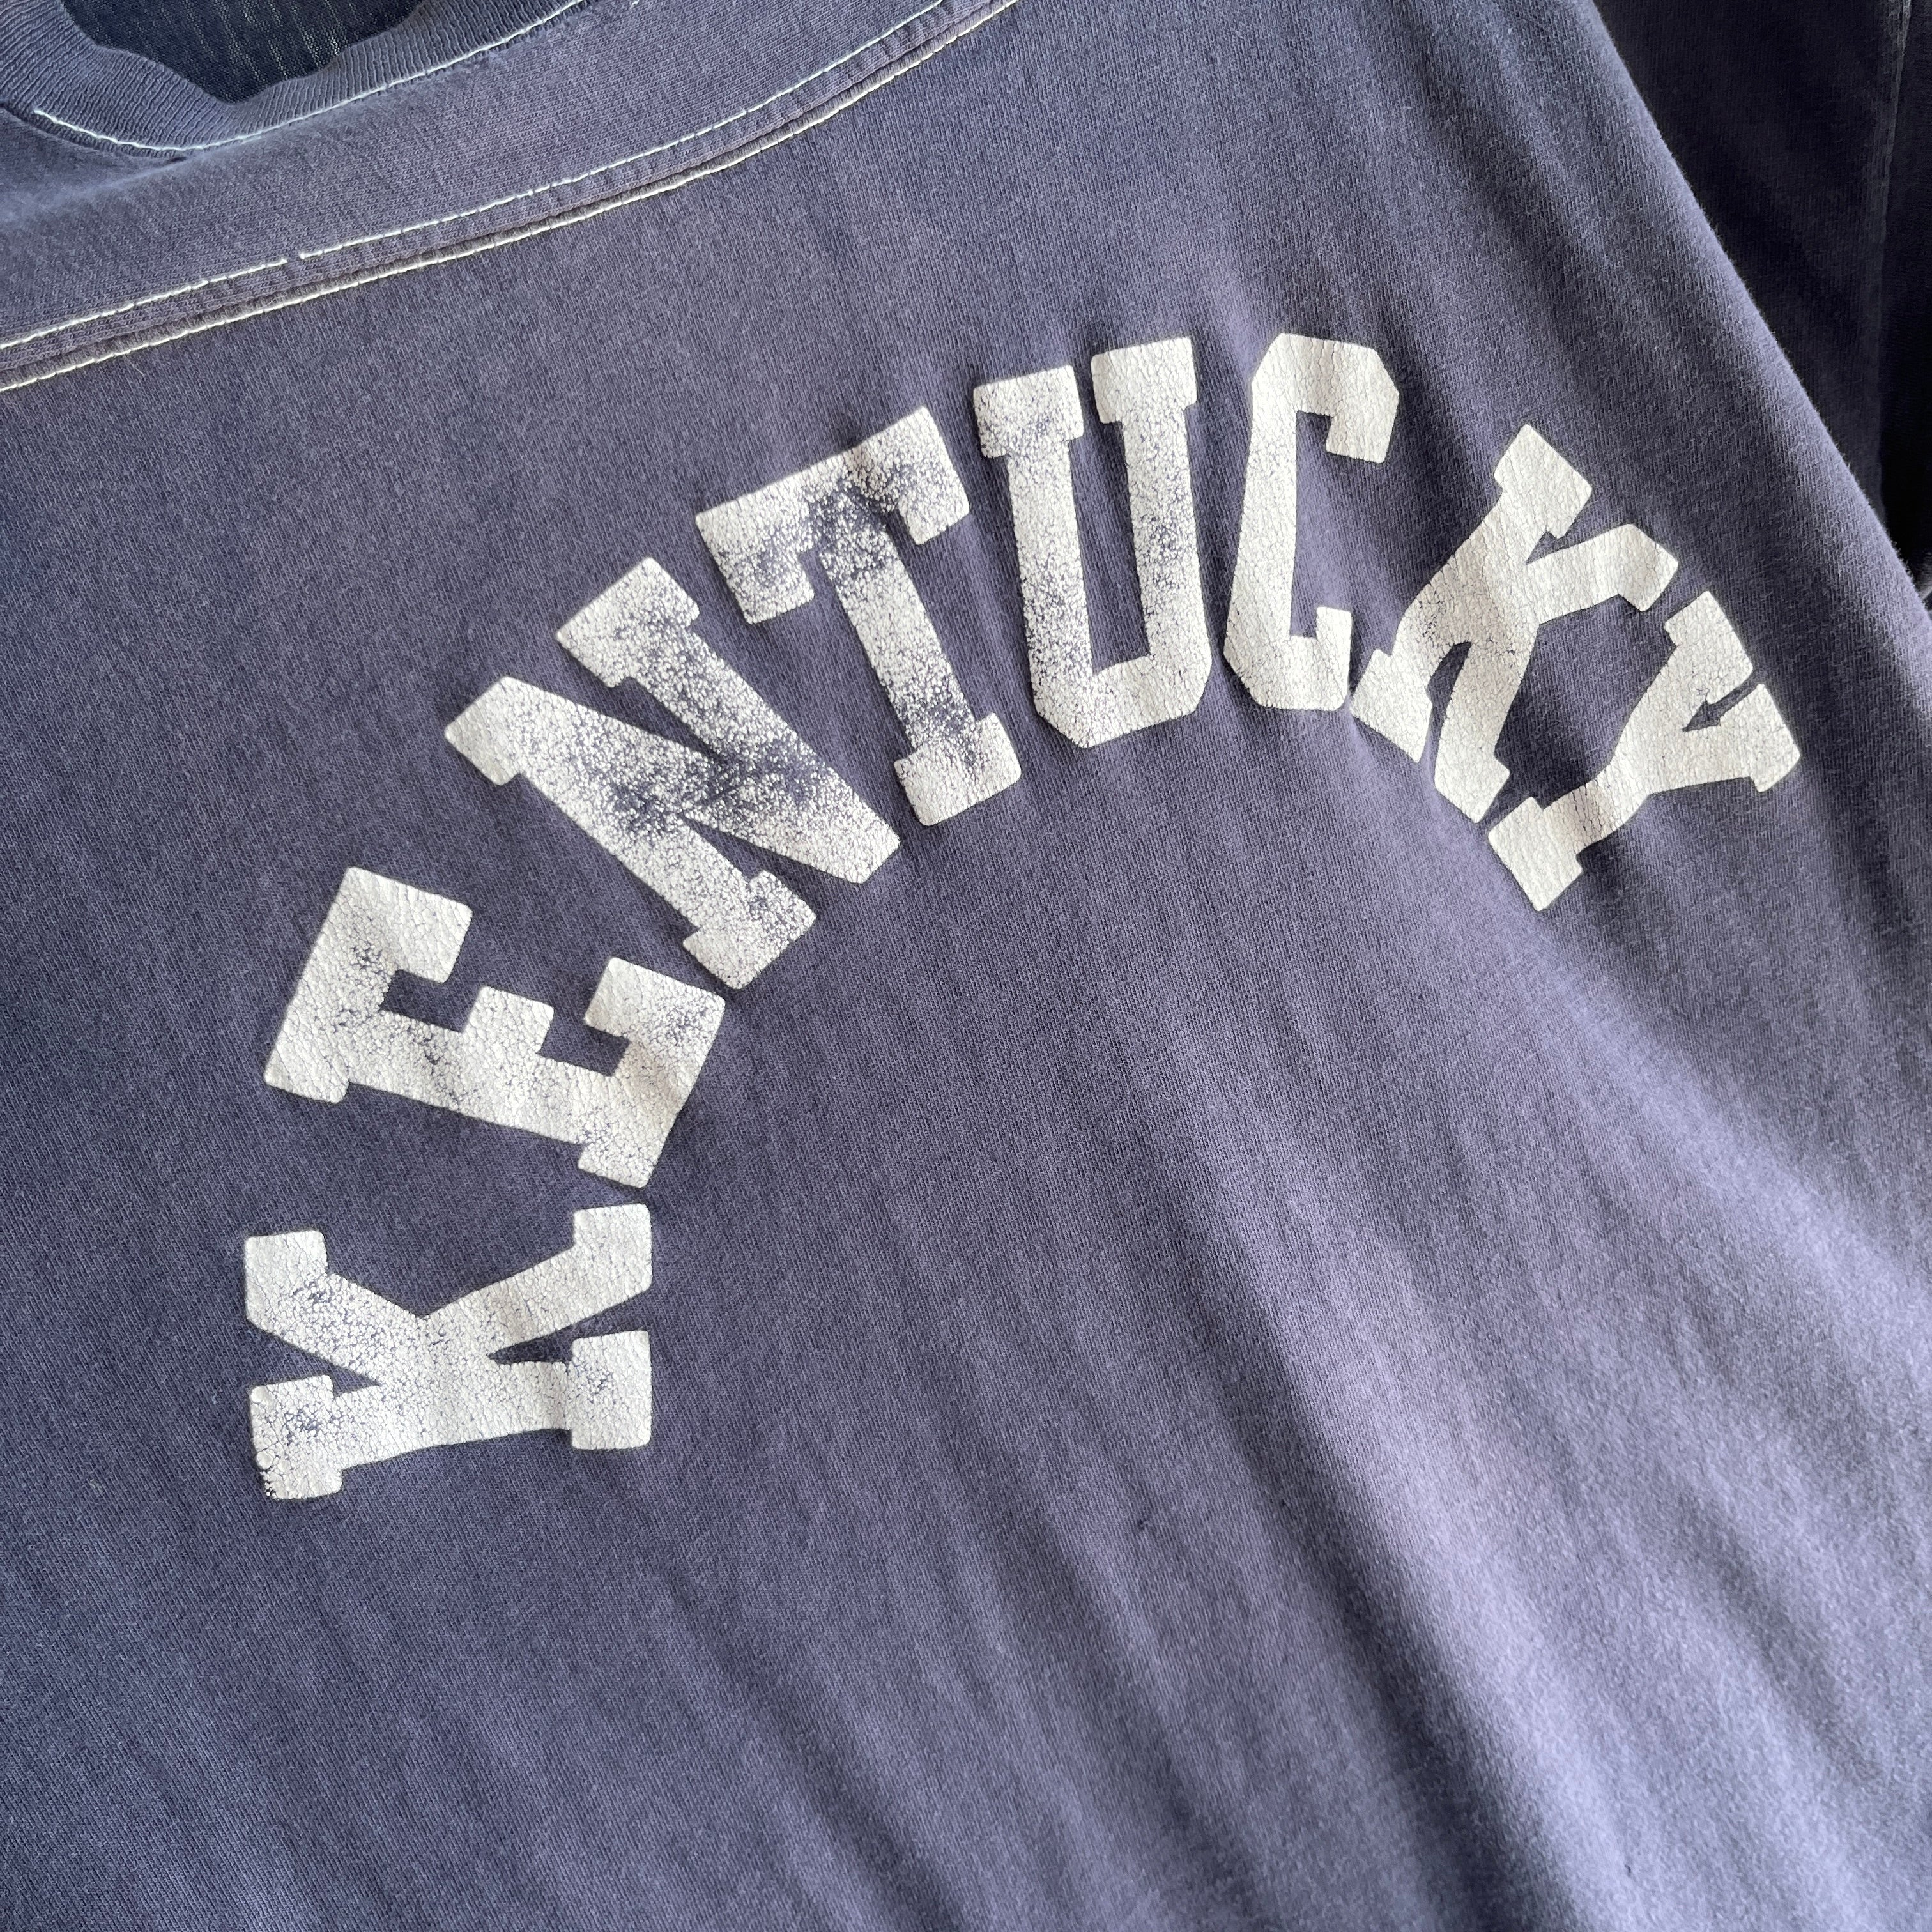 1970s Tattered and Destroyed Kentucky Football T-Shirt with White Contrast Stitching